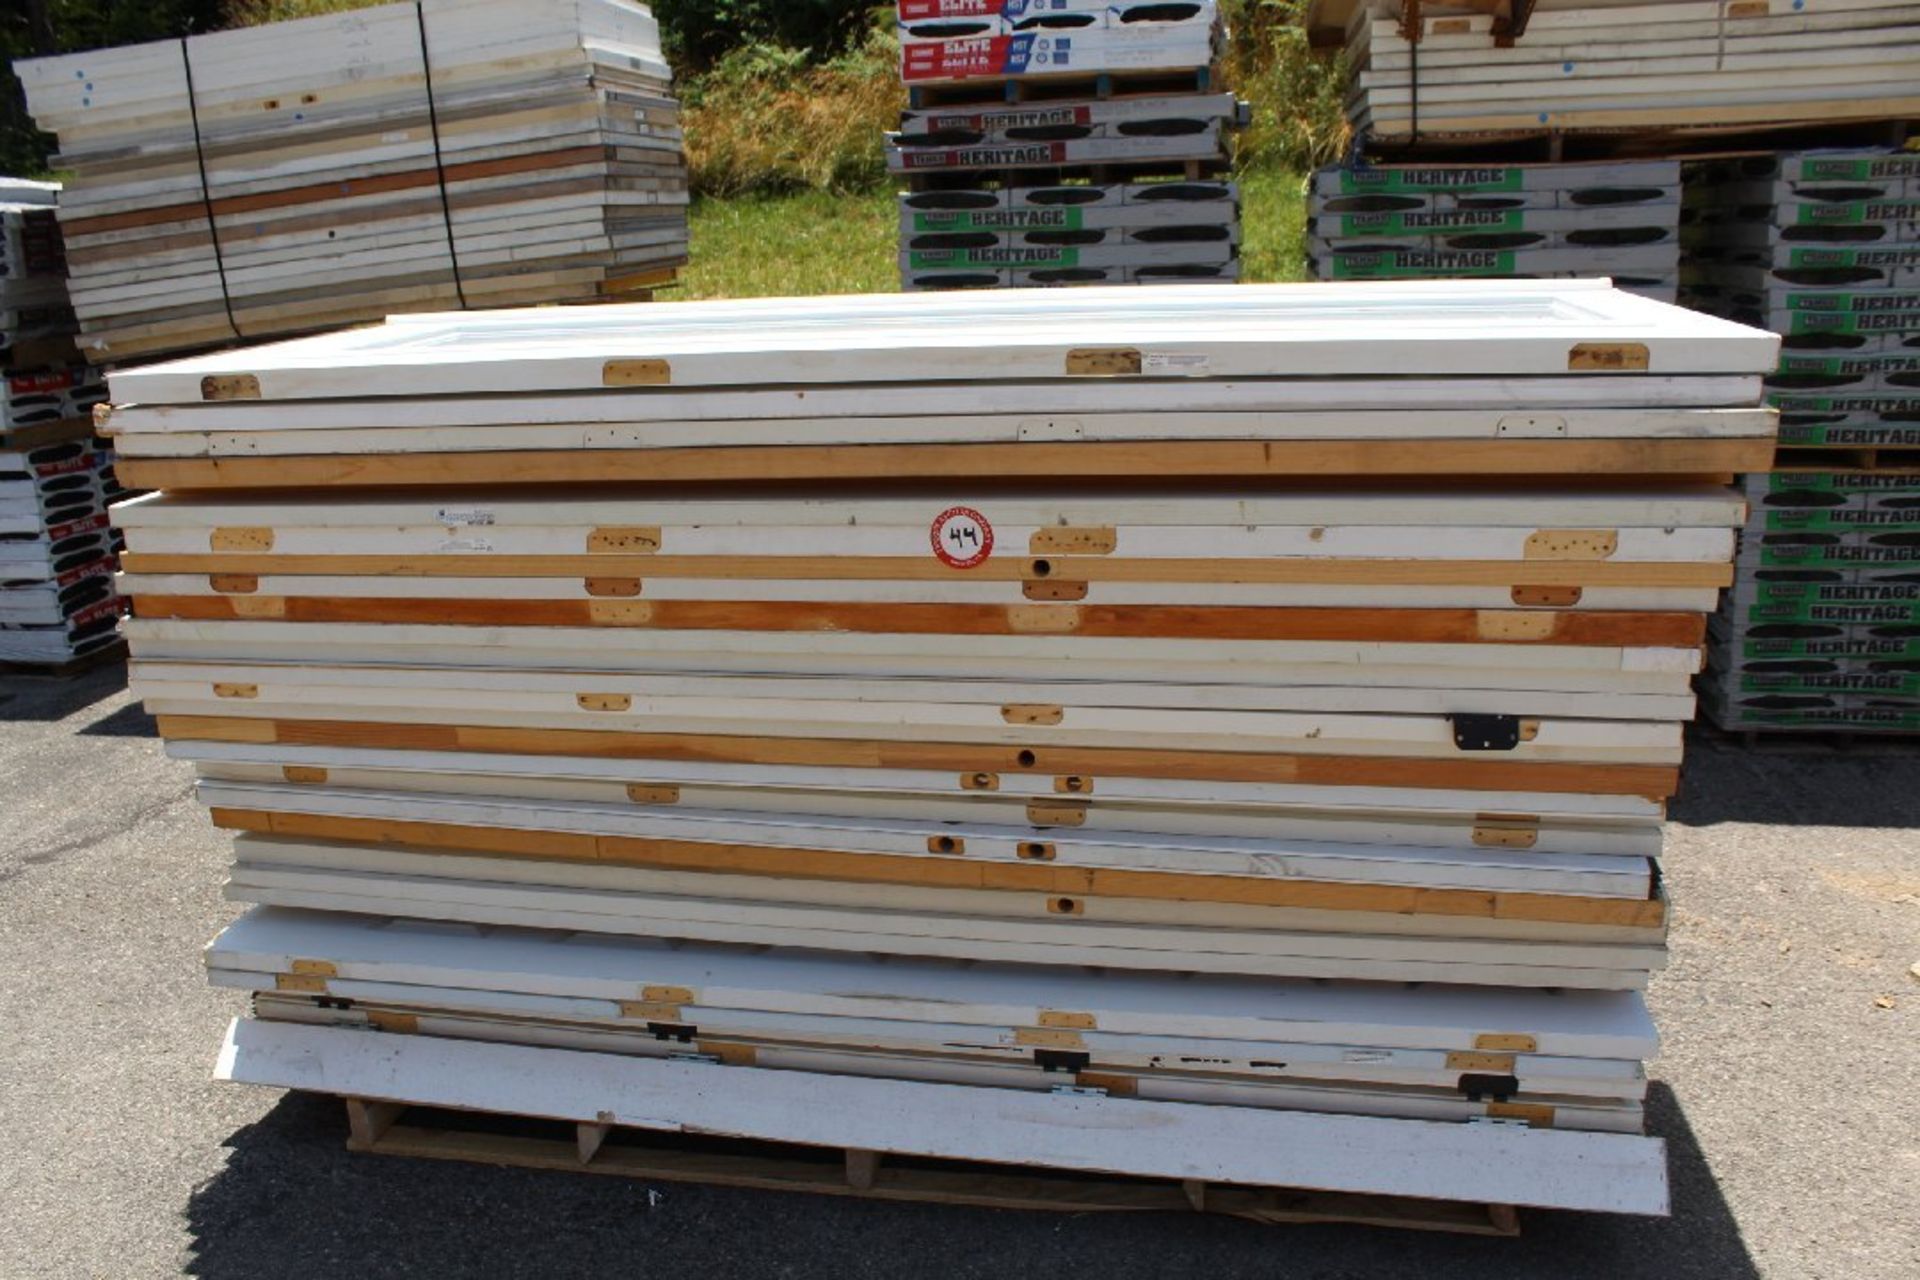 Pallet of Assorted Hollow Core Interior/Exterior Slab Doors, Size Range from 32" - 36" = Quantity of